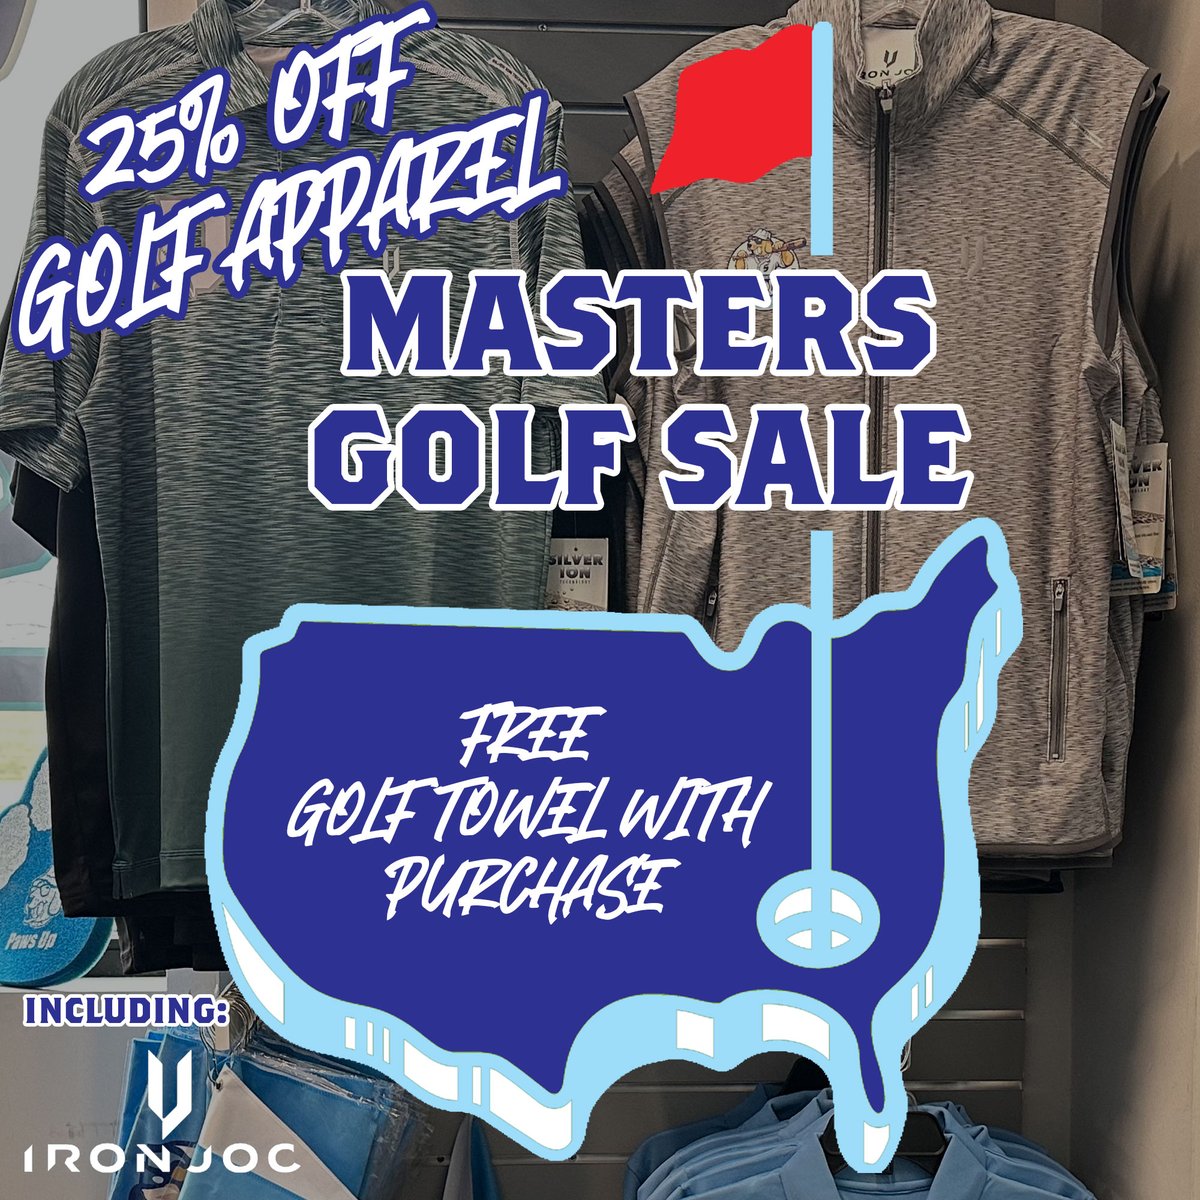 25% Off DockHounds Golf Apparel to celebrate the Masters Purchase any golf apparel and also receive a DockHounds Golf Towel FREE! Sale Ends at midnight Sunday, April 14 dockhoundsfanstores.com